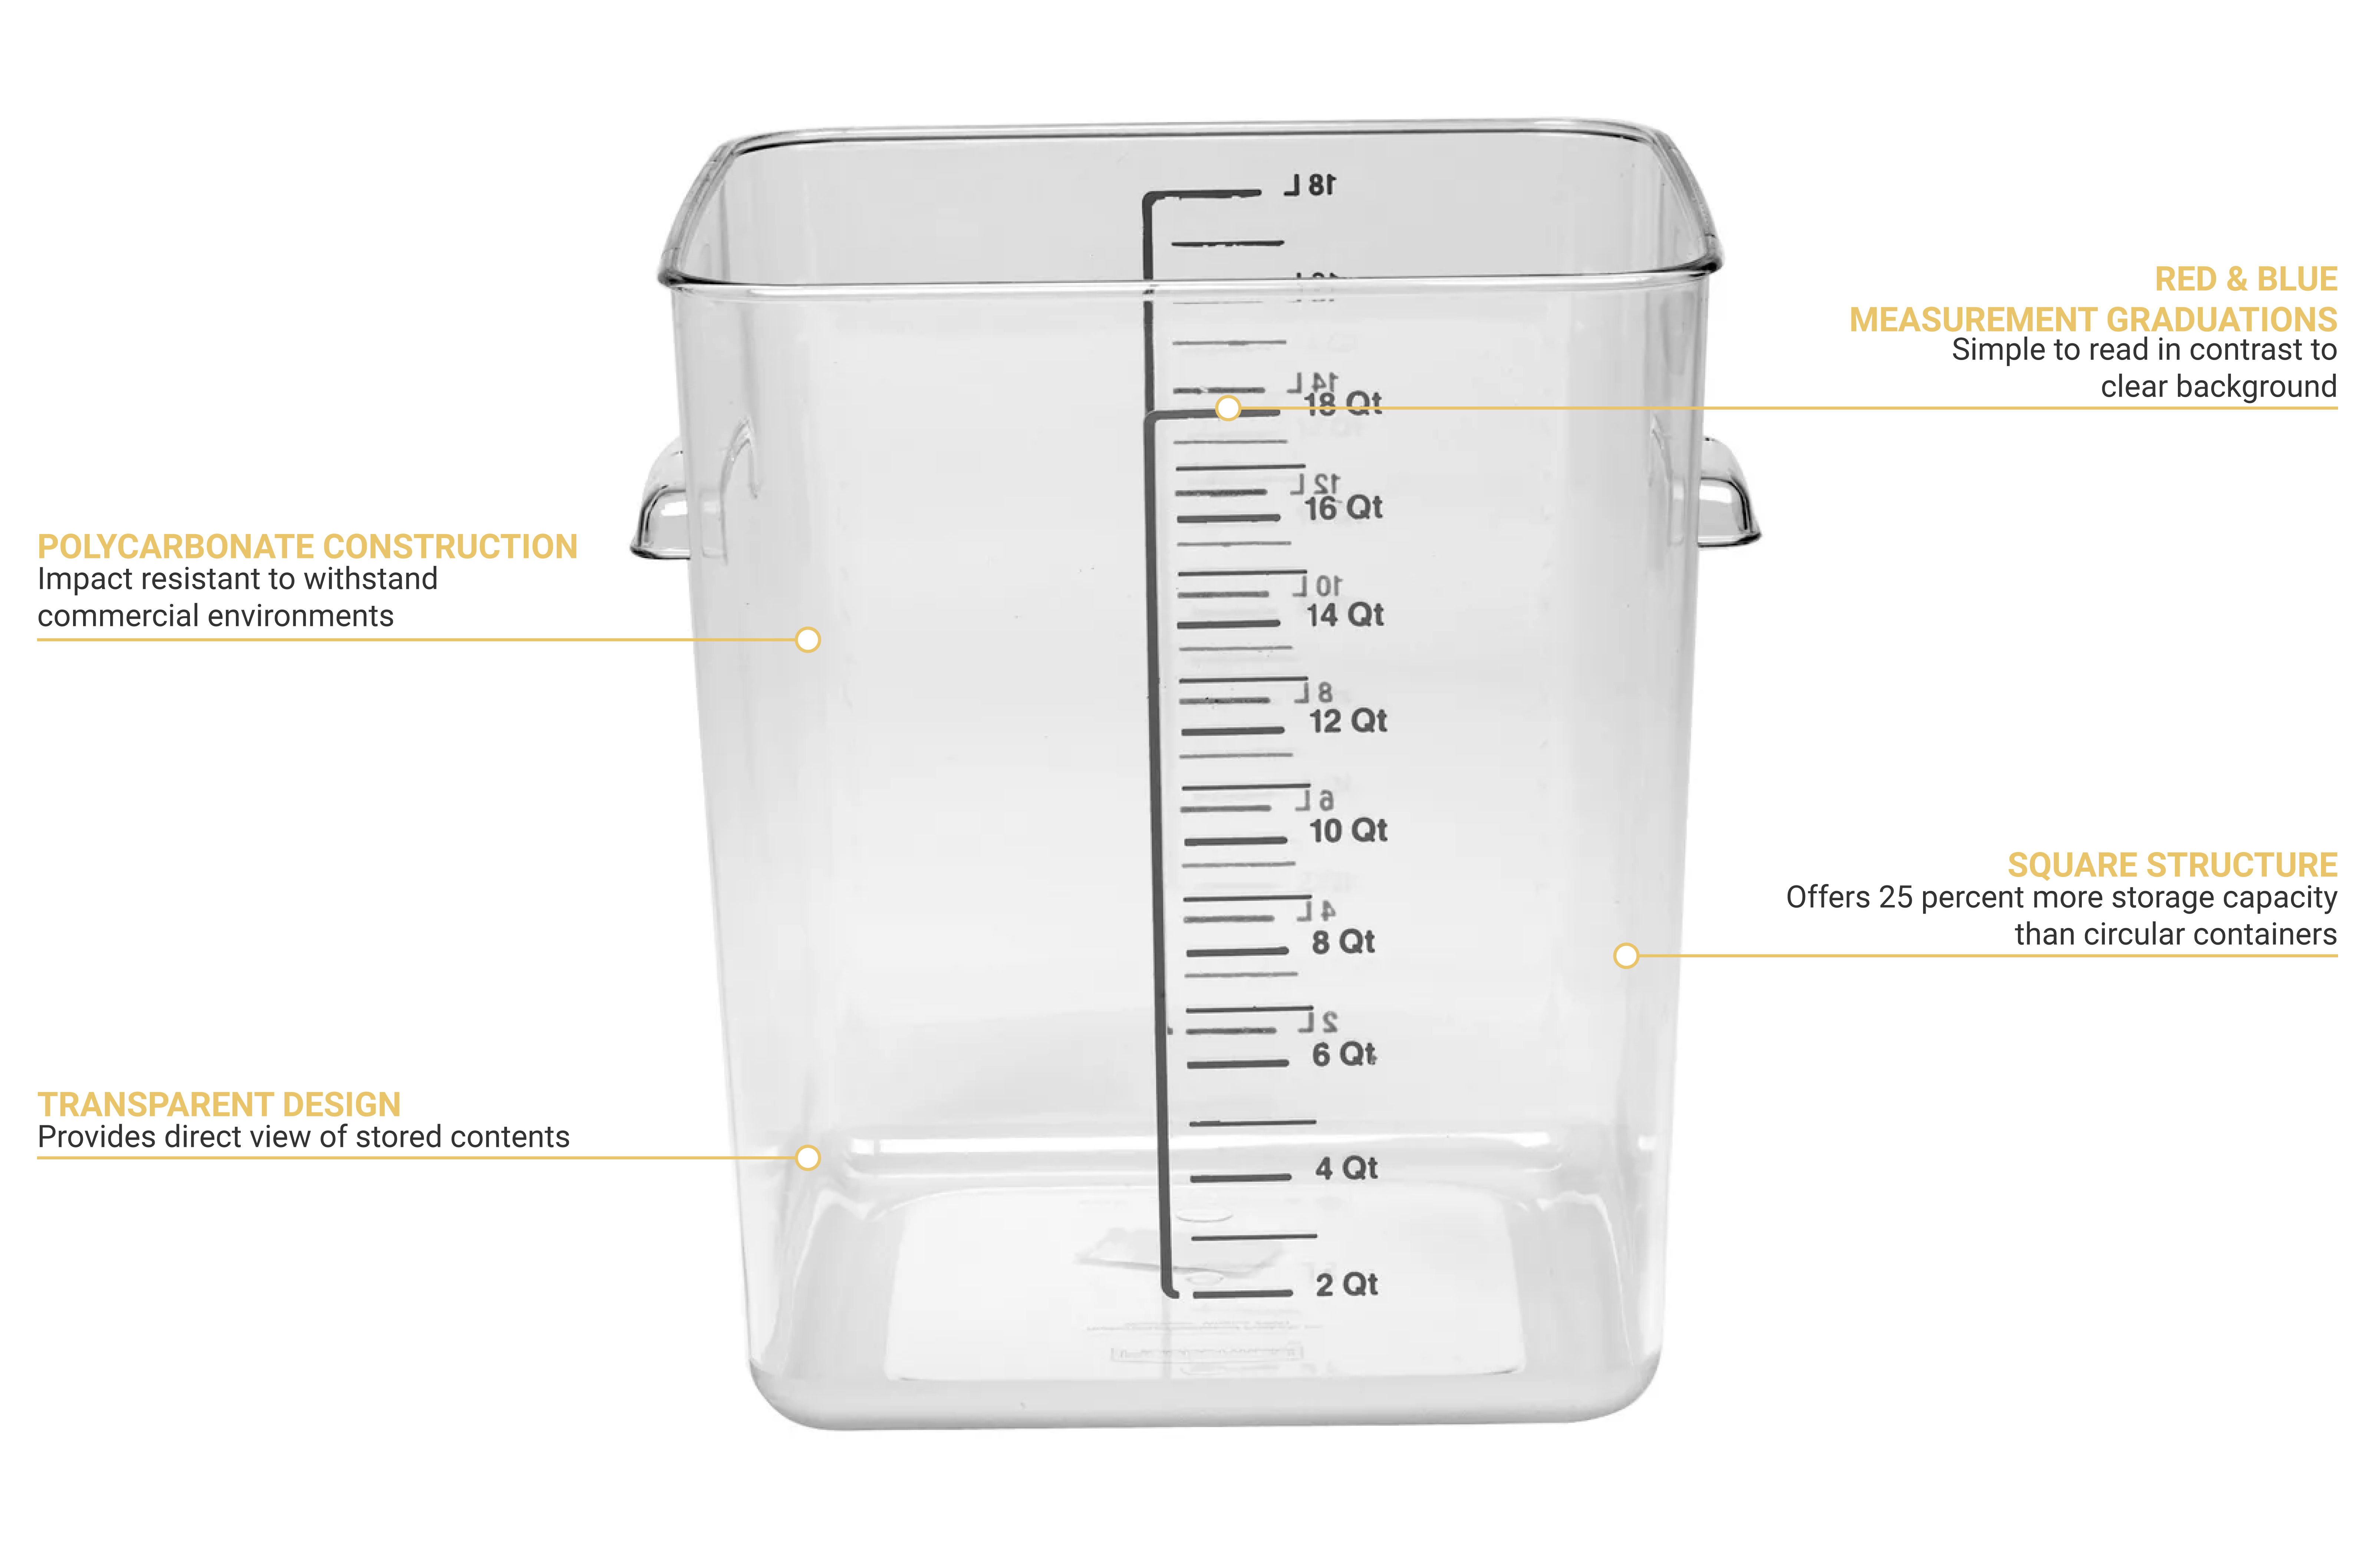 Rubbermaid Round Storage Containers Clear - 6 qt.